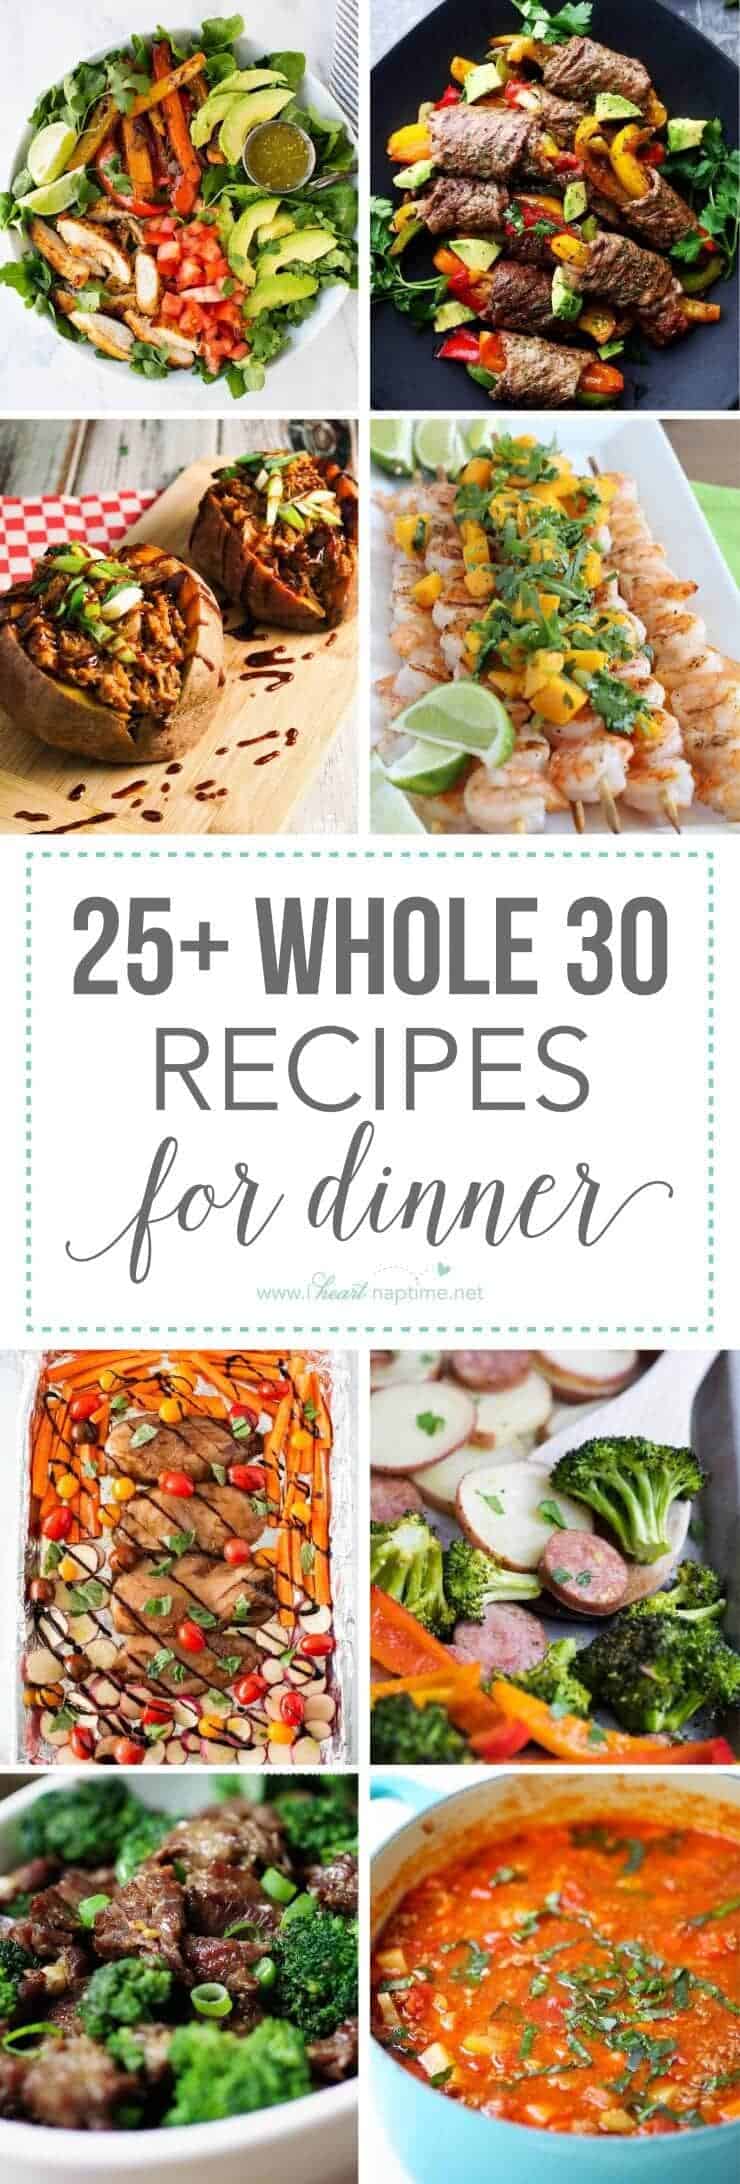 25+ Mouth-Watering Whole 30 Recipes - some of the most healthy and delicious dinners you've ever tasted, all Whole 30 compliant!